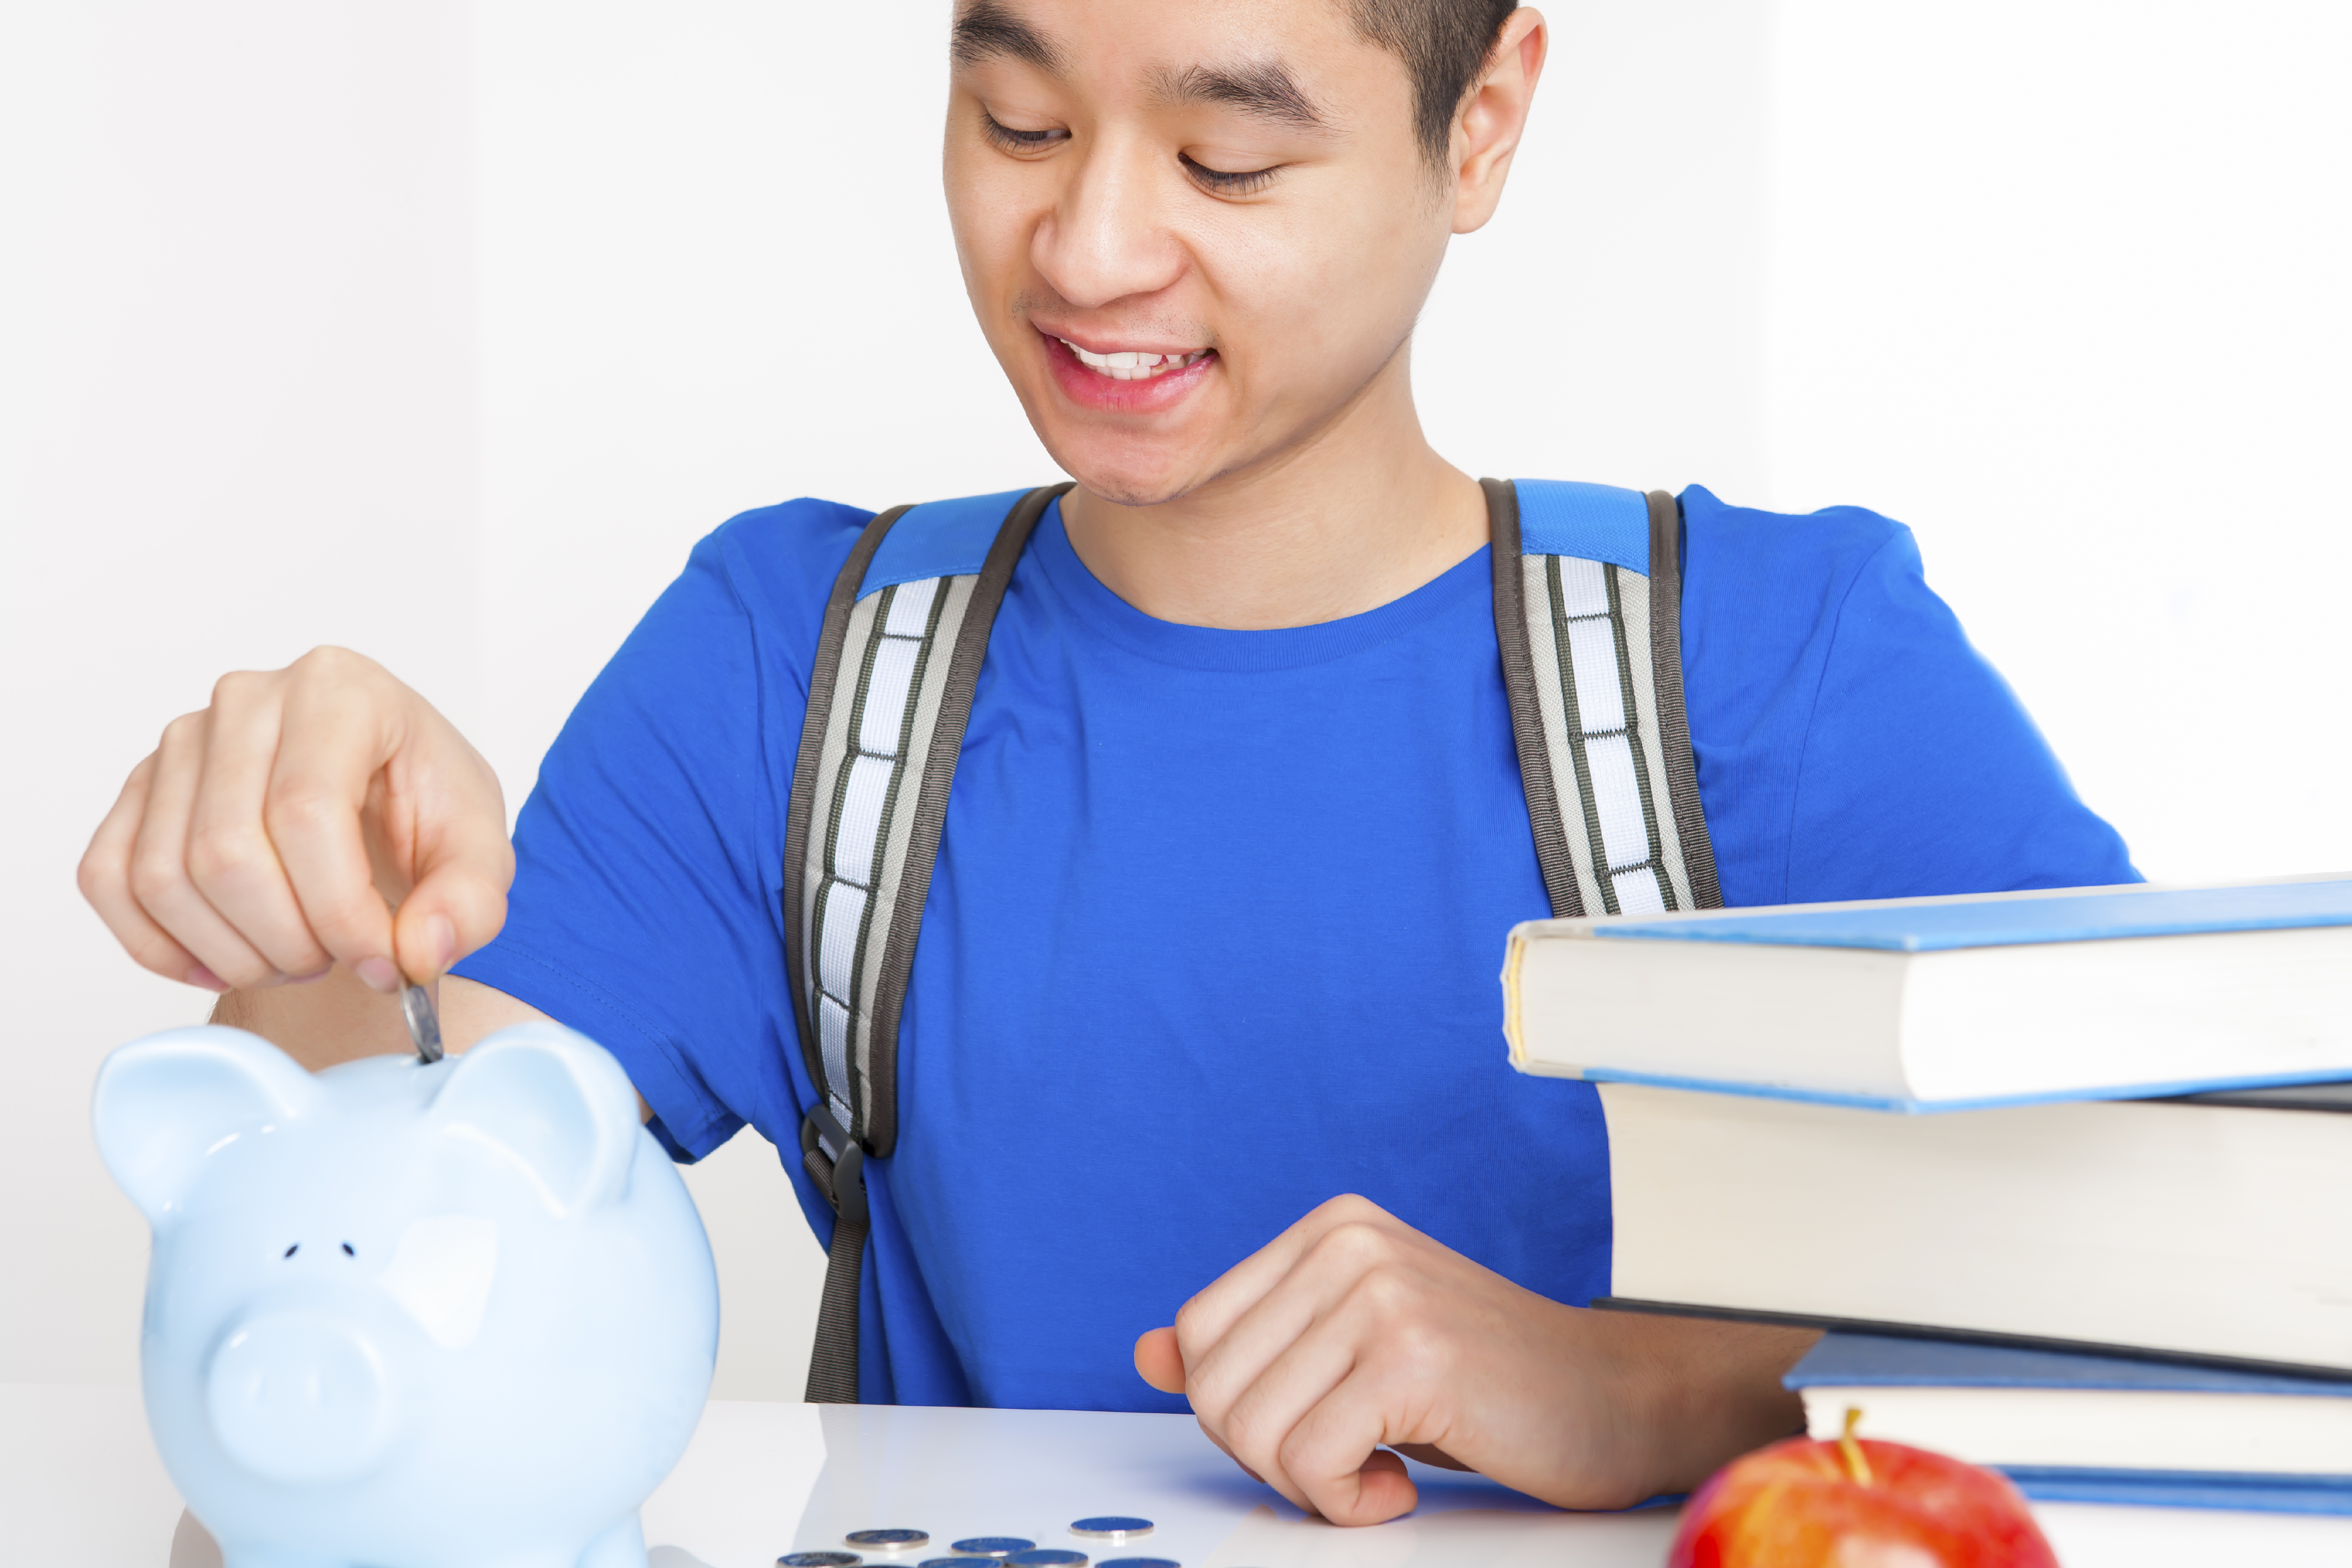 Student Loan Repayment Options: Which One is Right for You?